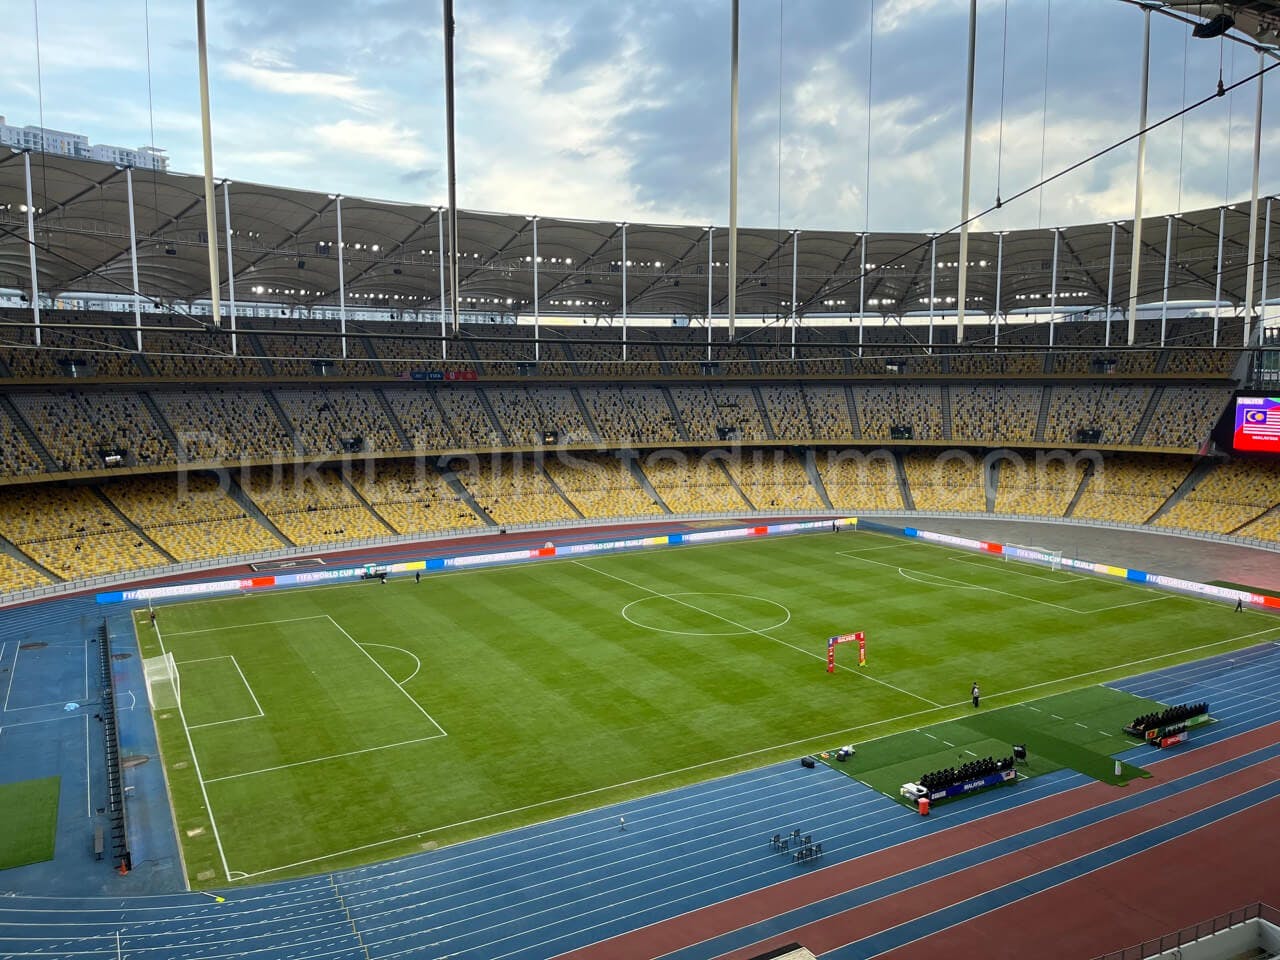 1x View of Bukit Jalil field from section 334 of Stadium Bukit Jalil.